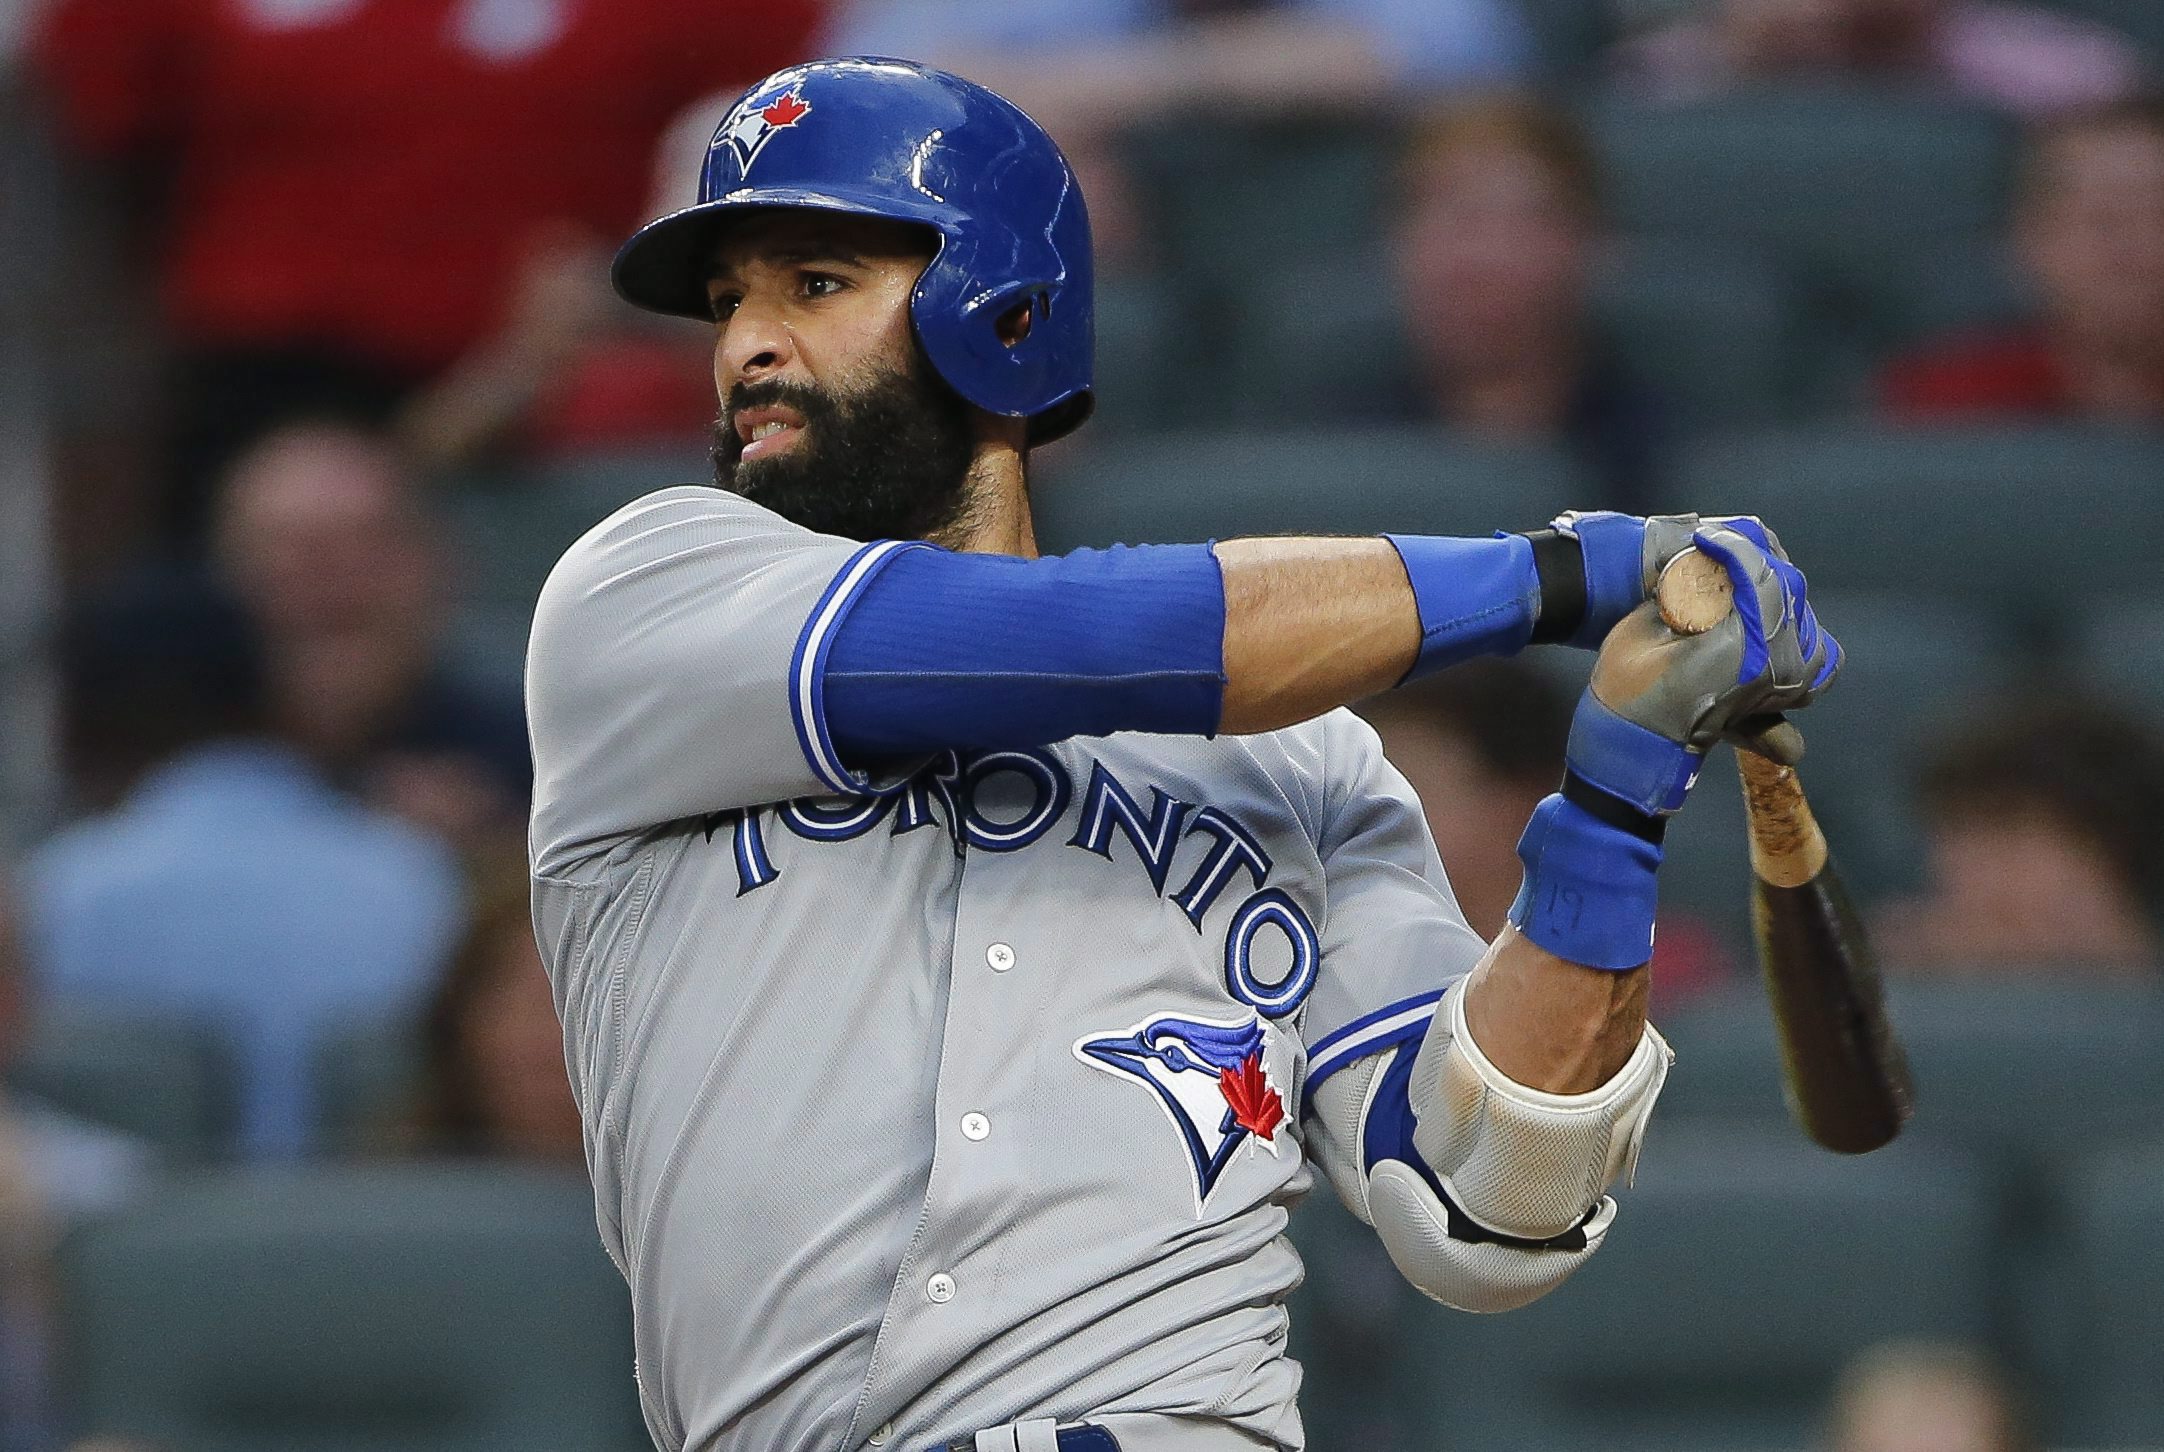 Jose Bautista will officially retire as a Toronto Blue Jay